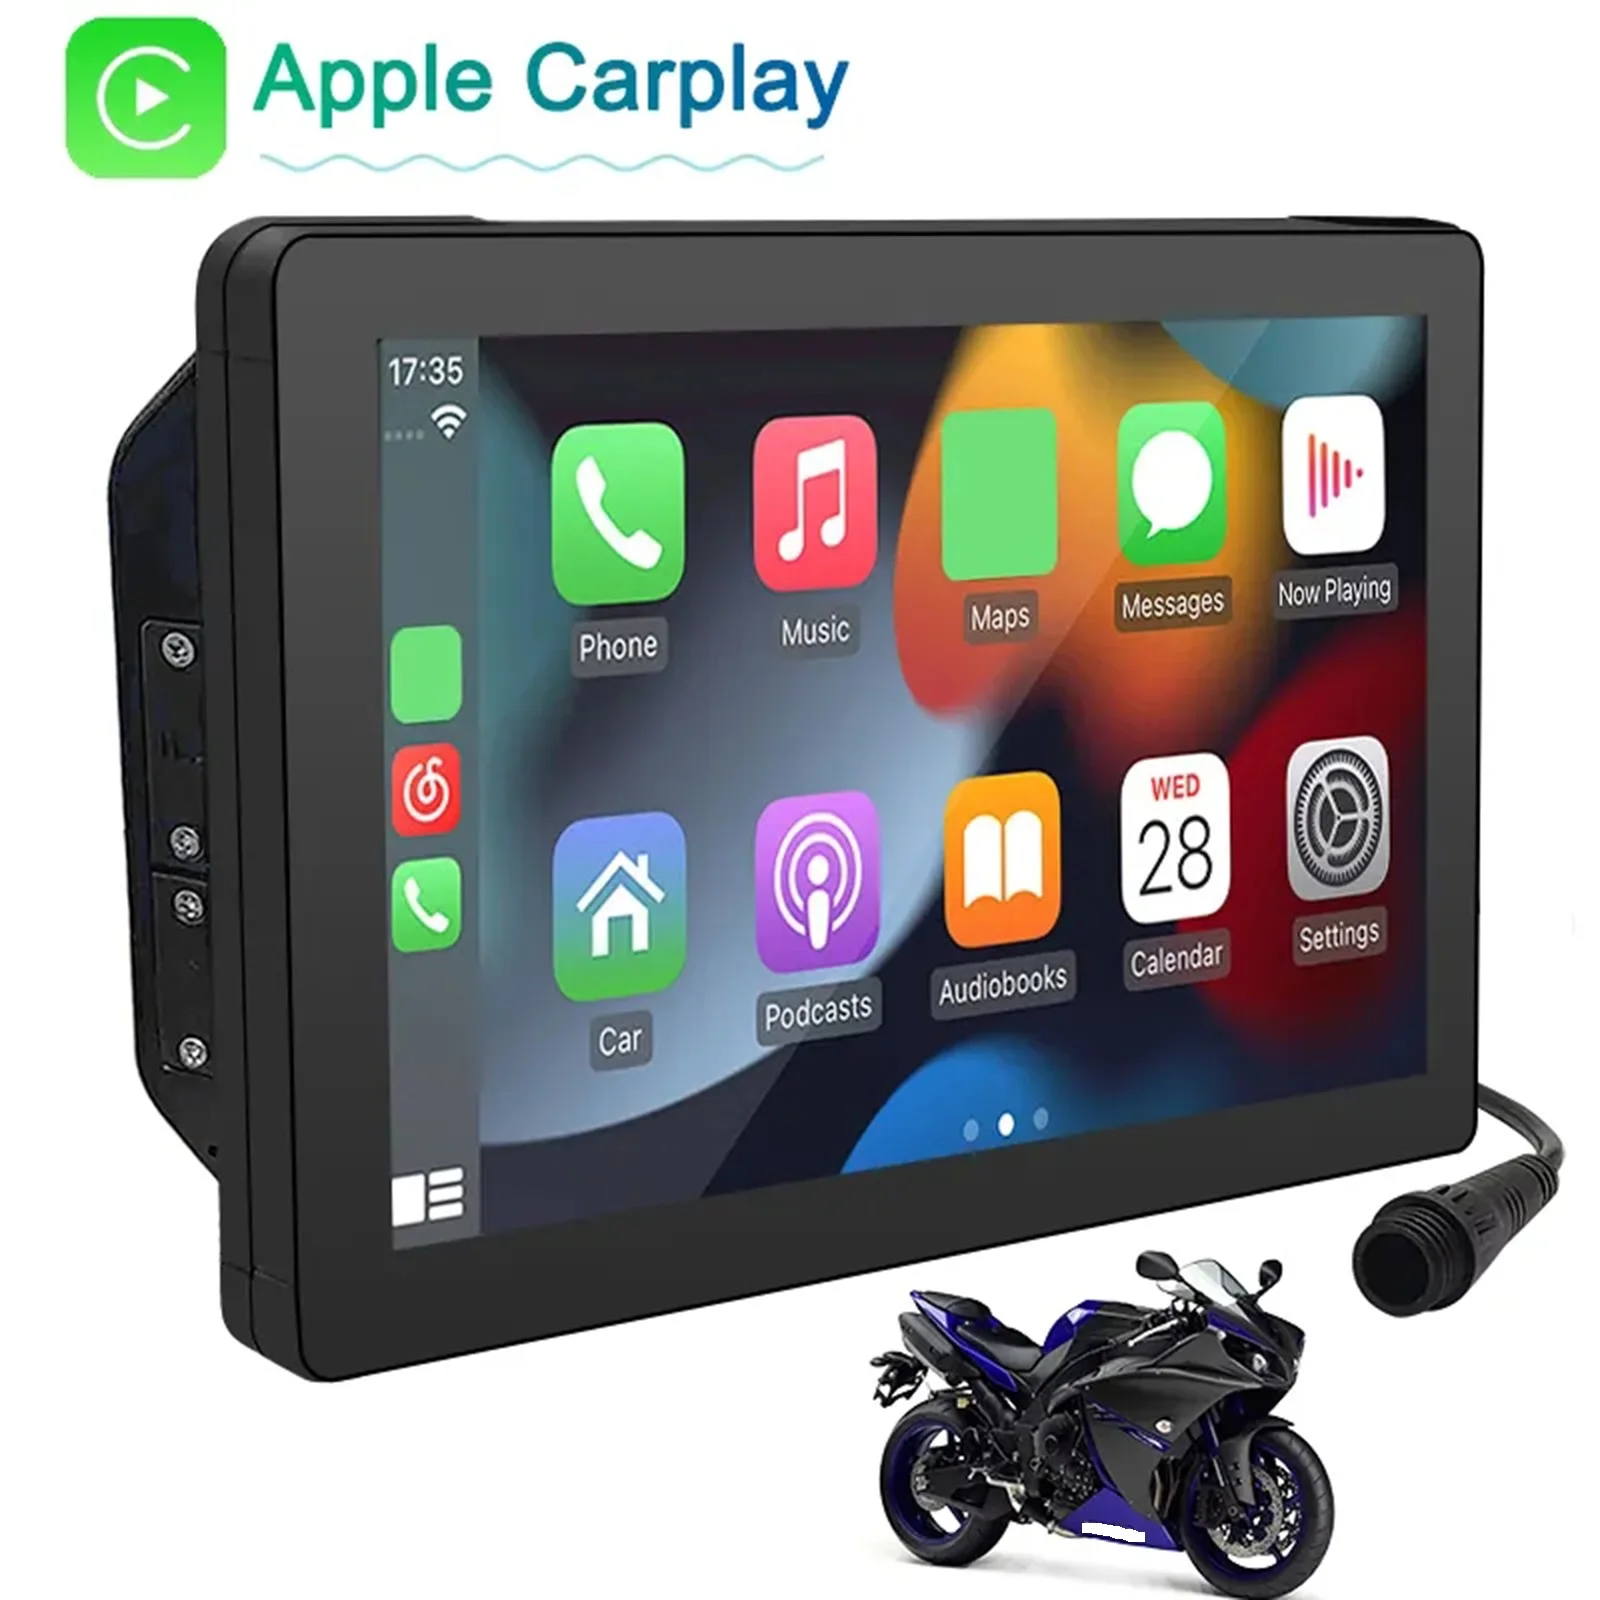 

7 Inch Touch Screen Motorcycle Navigator Universal Motorcycle CarPlay Wireless Carplay Android Auto Bluetooth IPX7 Waterproof